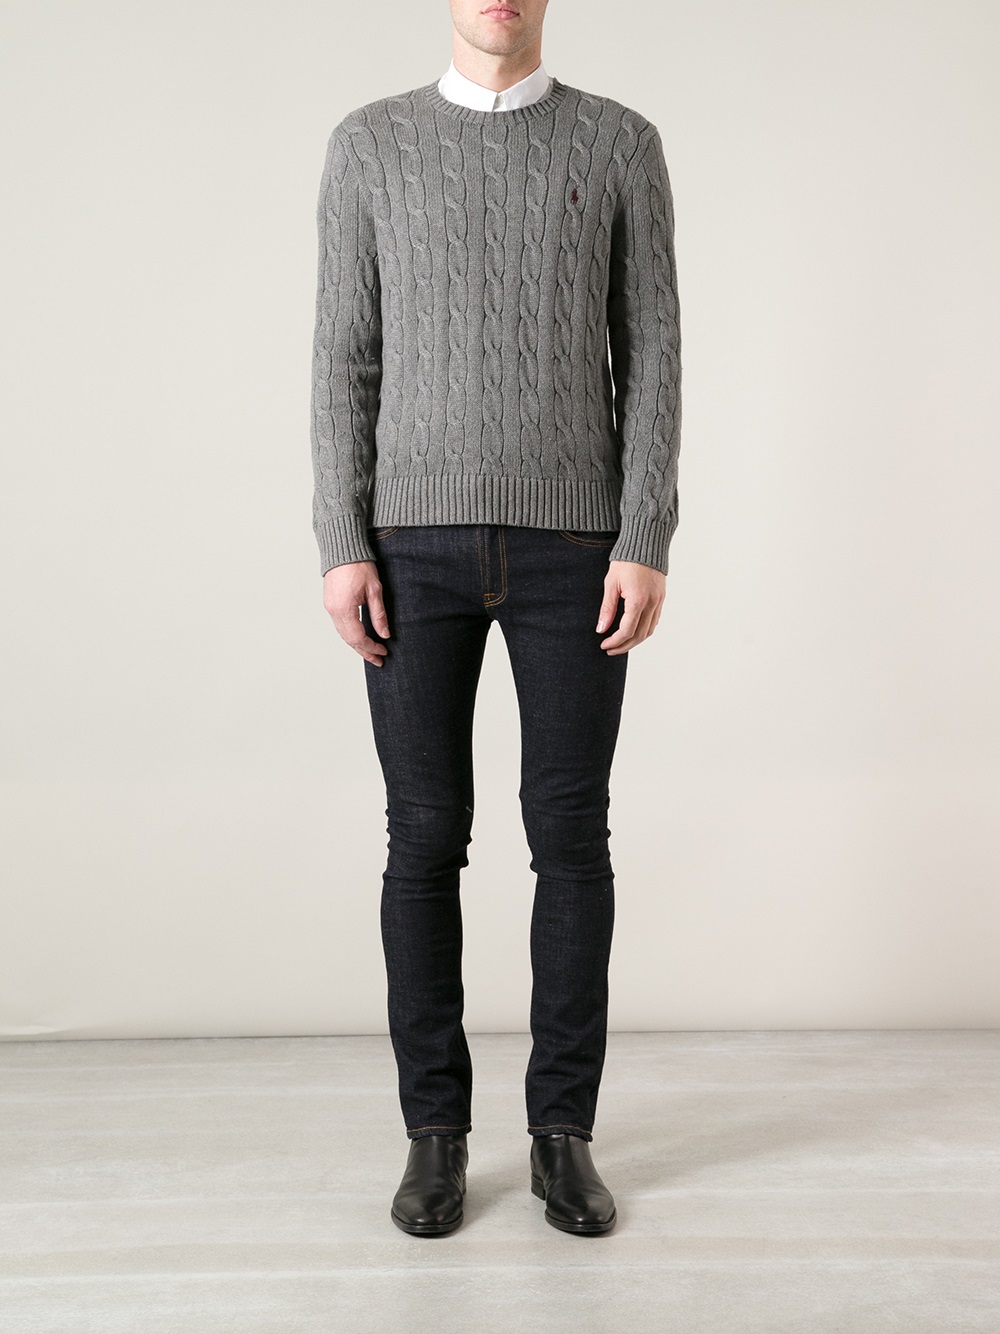 Polo Ralph Lauren Cable Knit Sweater in Grey (Gray) for Men - Lyst